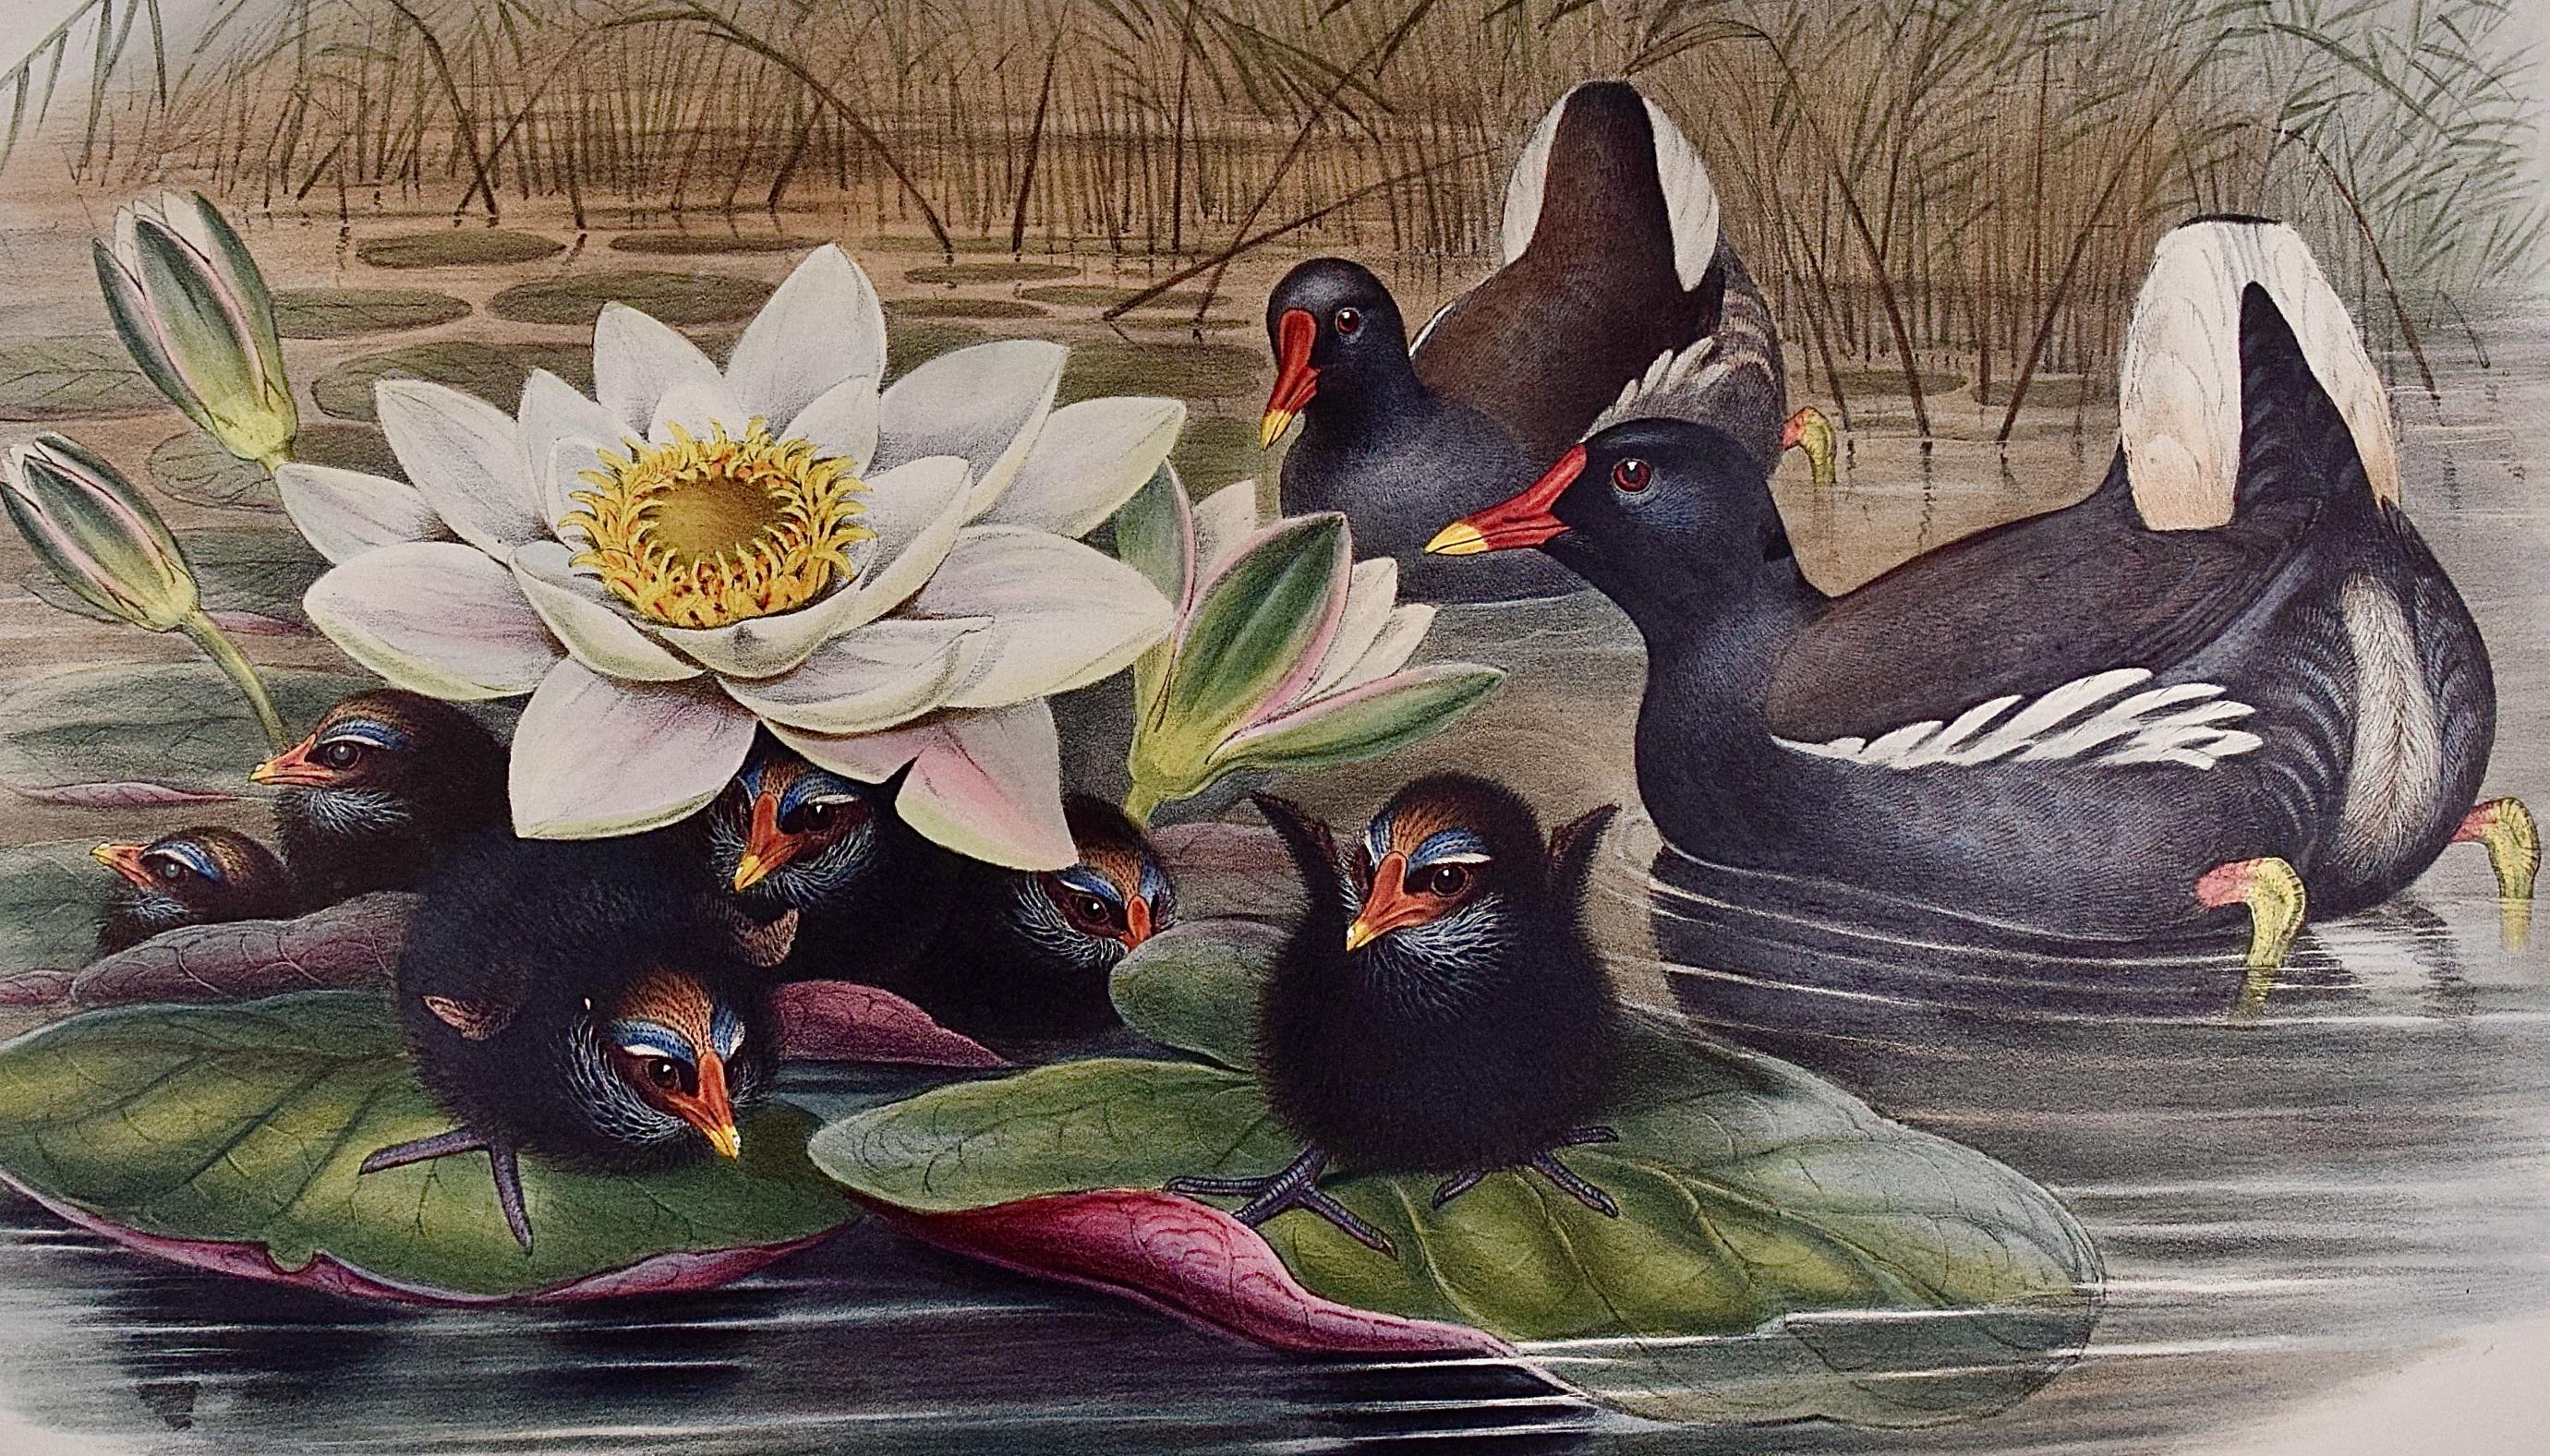 A Family of Moorhens & Lilly Pad: A 19th C. Hand-colored Lithograph by Gould - Naturalistic Print by John Gould and Henry Constantine Richter